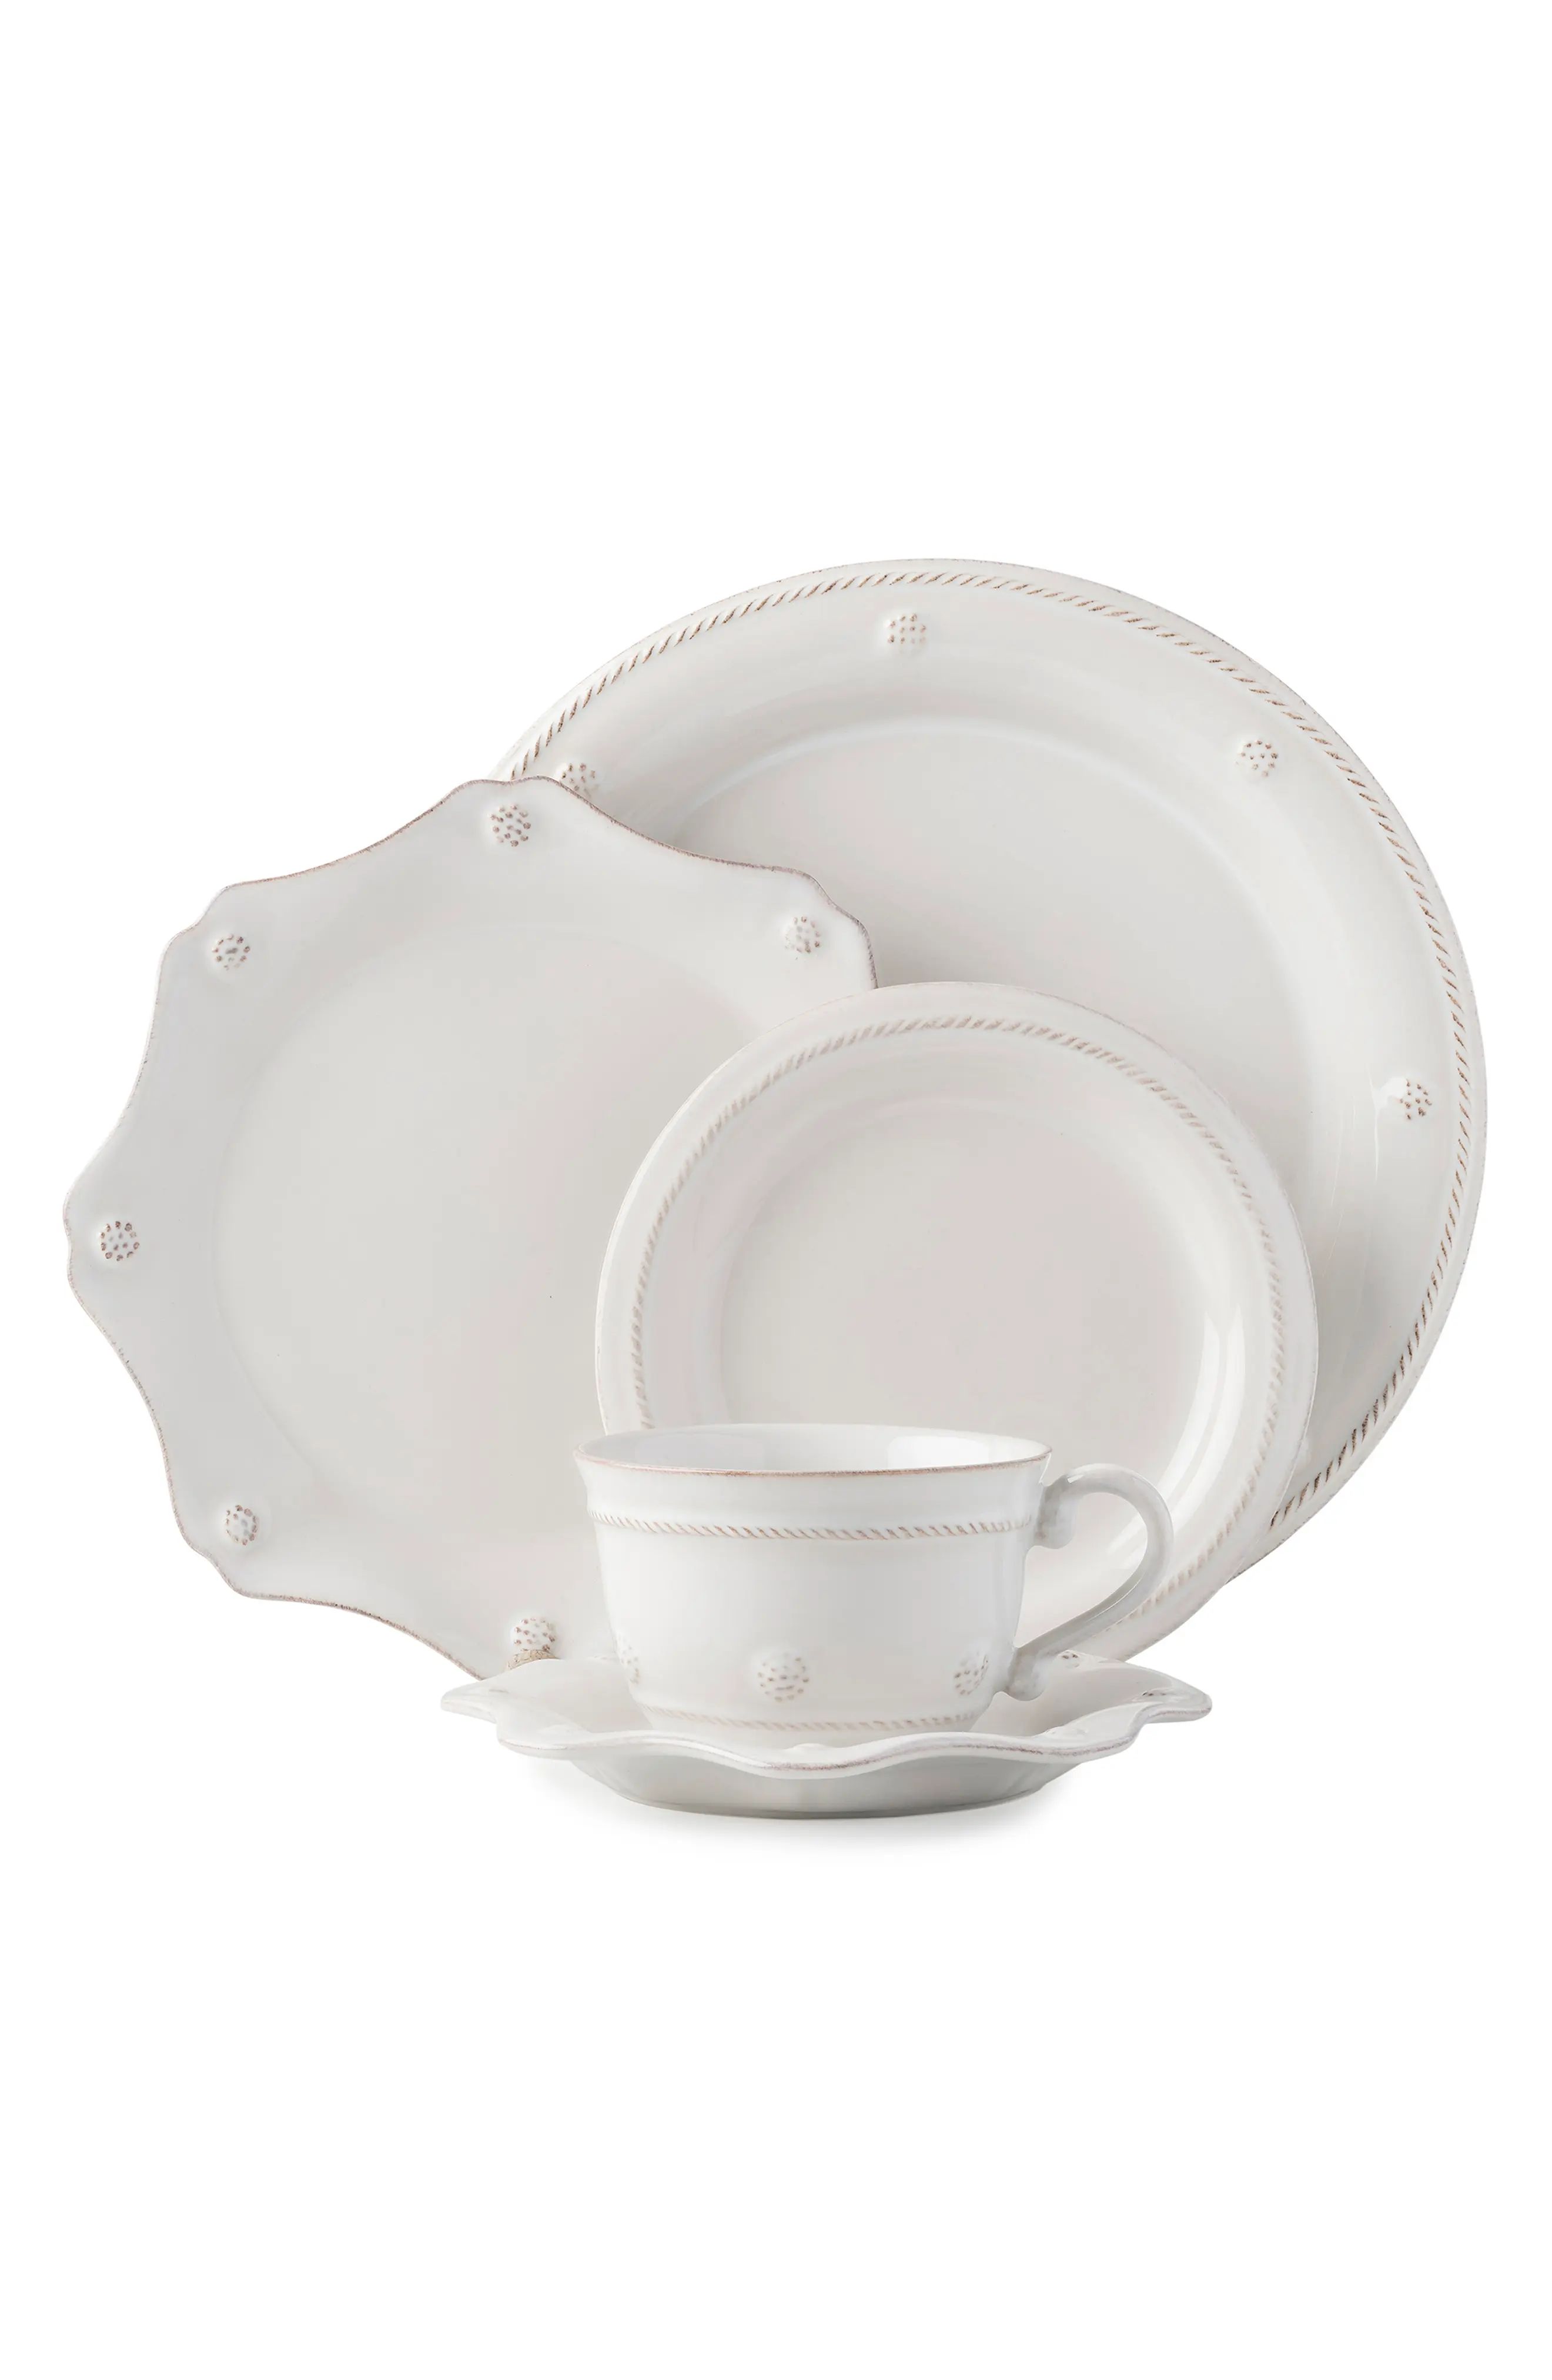 Juliska Berry & Thread Whitewash 5-Piece Place Setting With Teacup, Size One Size - White | Nordstrom